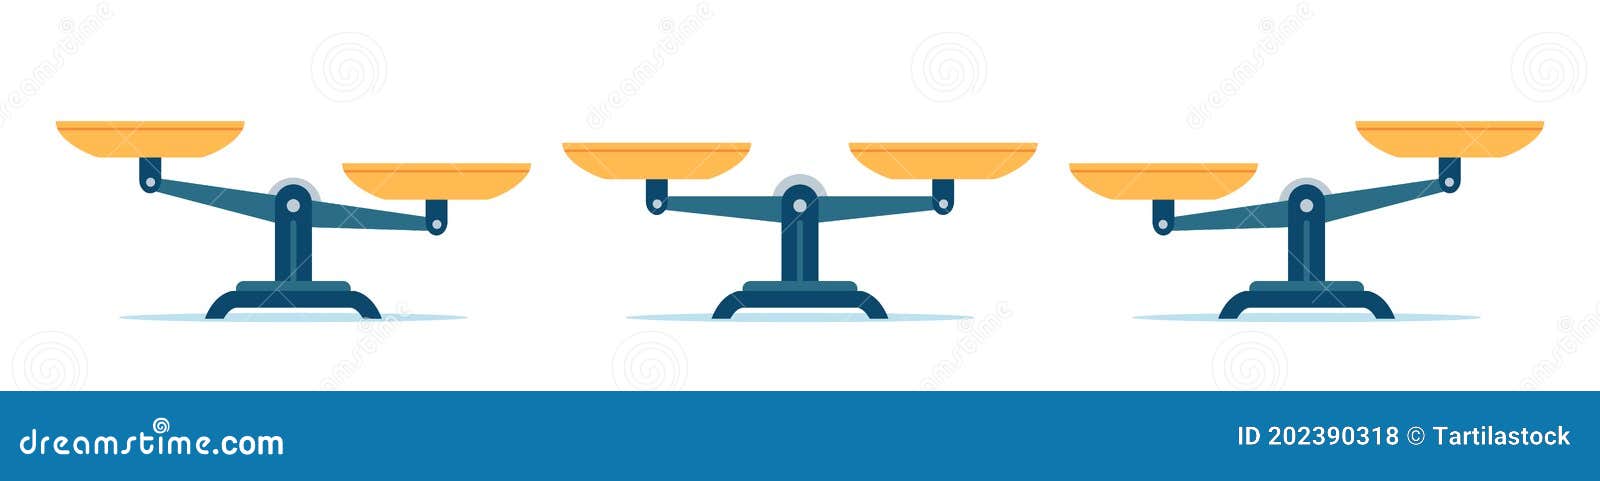 scales in balance and imbalance. flat libra icon with gold bowls in equal position. weight mass comparison on leverage